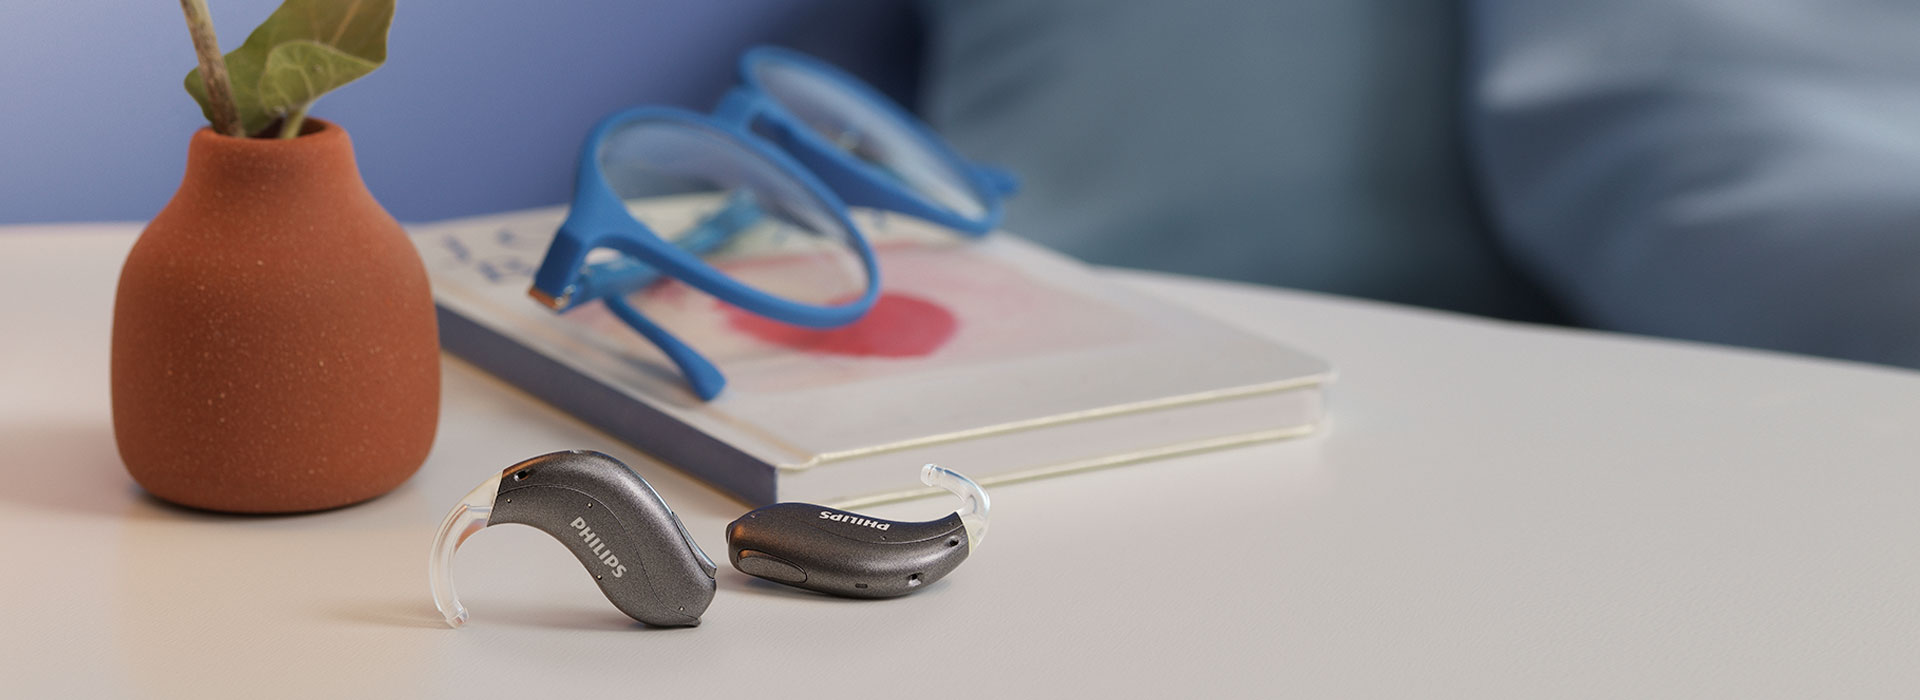 Philips HearLink hearing aids sit on a table at home next to a pair of reading glasses, a book, a lamp, and a ceramic vase with a small yellow flower